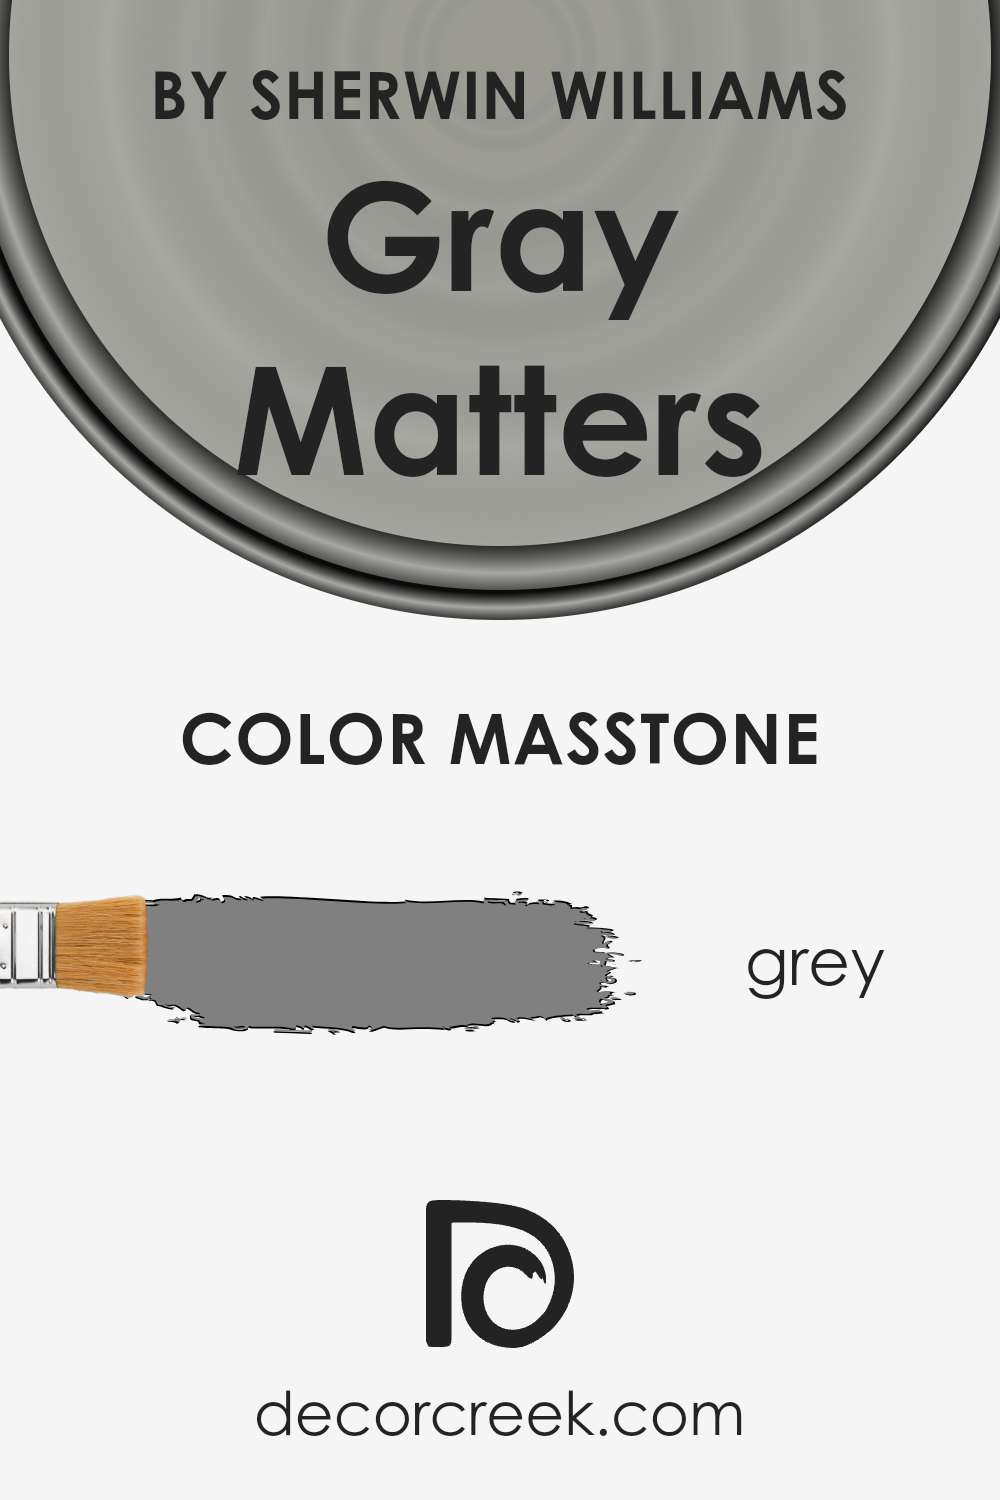 what_is_the_masstone_of_gray_matters_sw_7066